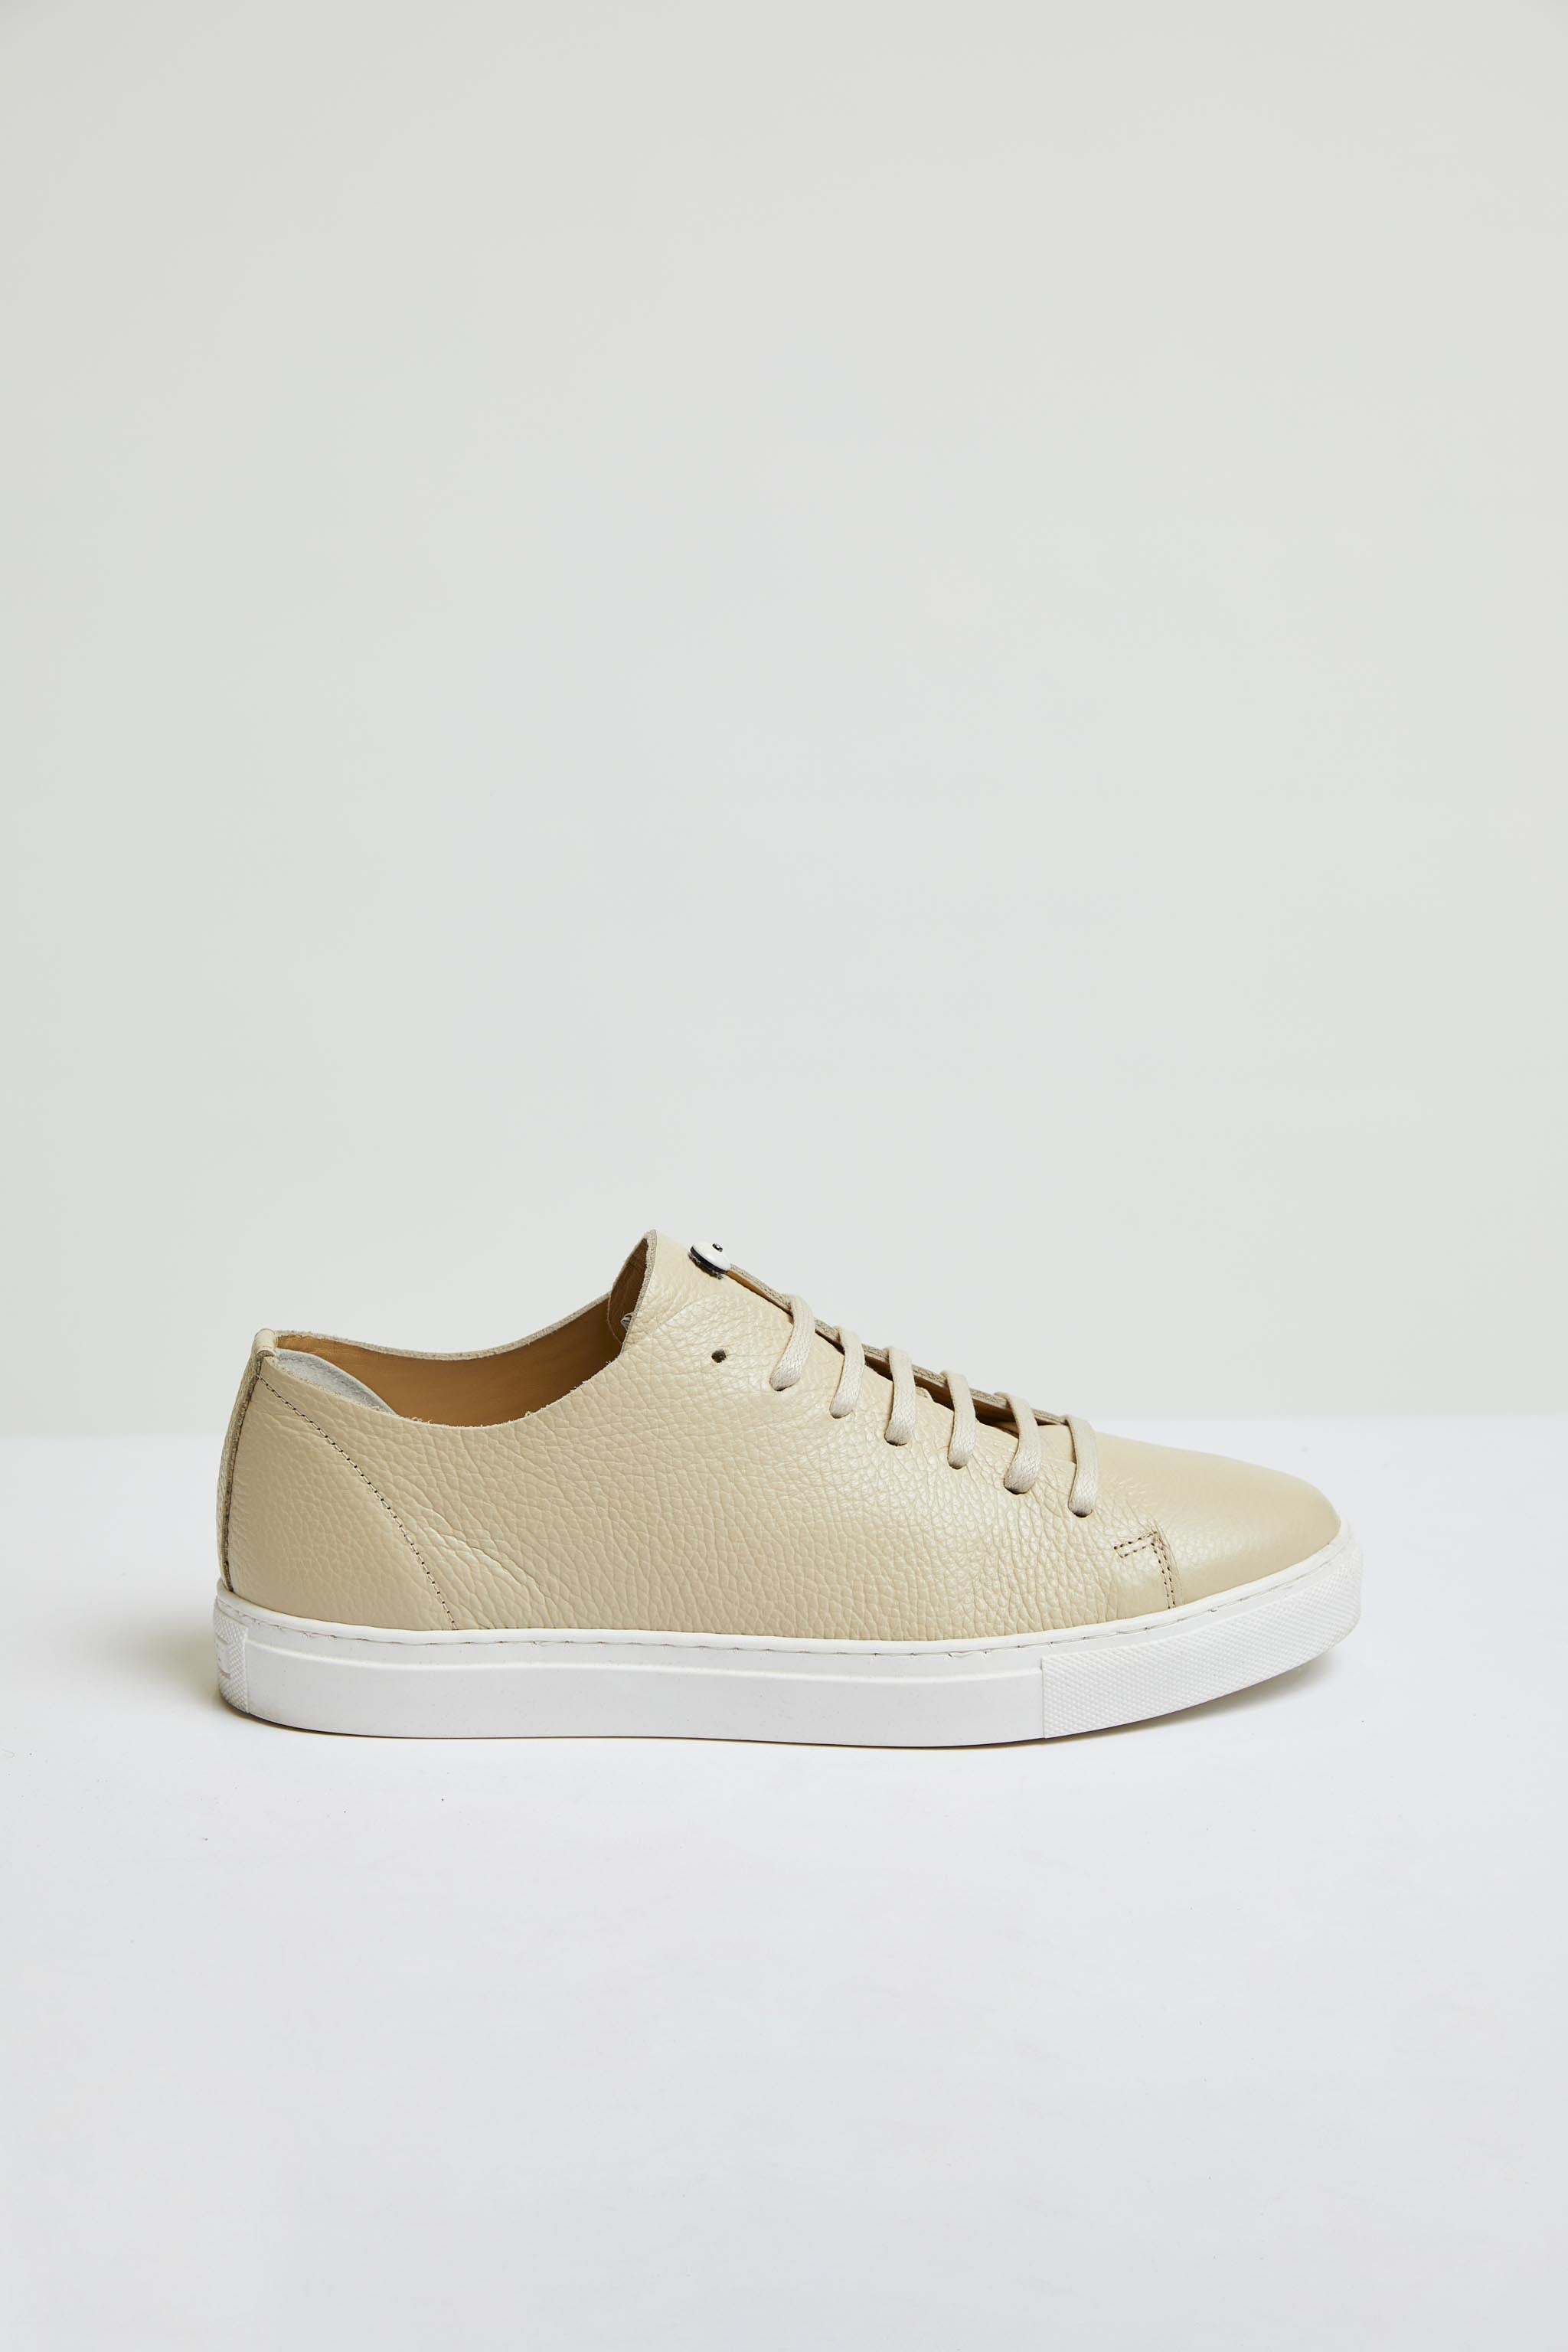 Perforated leather sneaker in beige